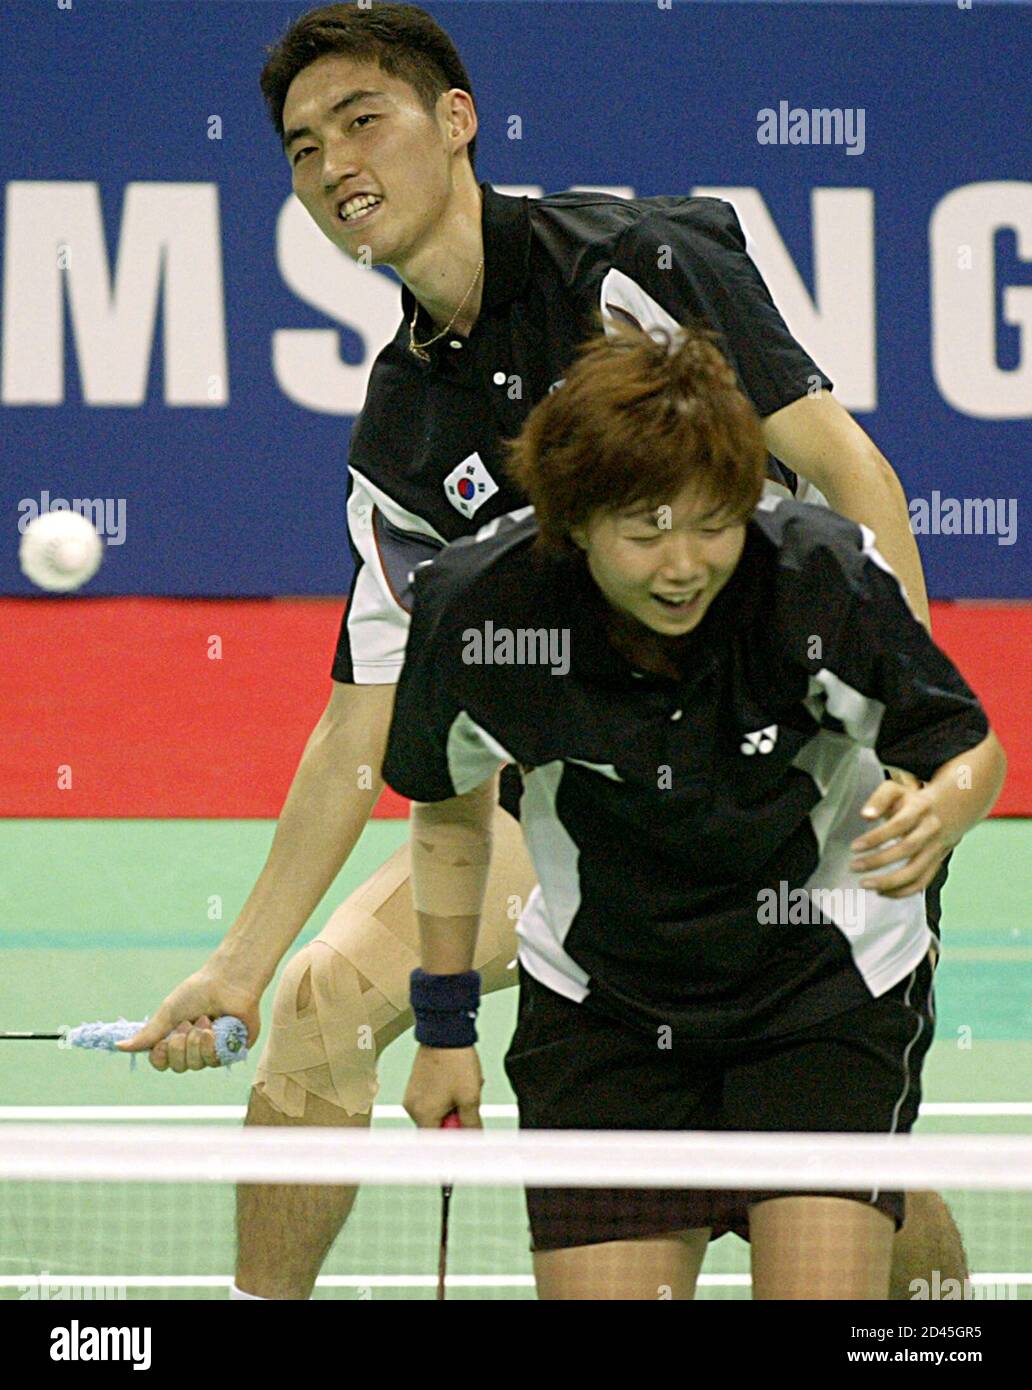 South Korea's Kim Dong Moon (L) and Ra Kyung Min play against Thailand's  Khunakorn Sudhisodhi and Saralee Thoungthongkam during the mixed doubles  badminton final at the 14th Asian Games in Pusan October